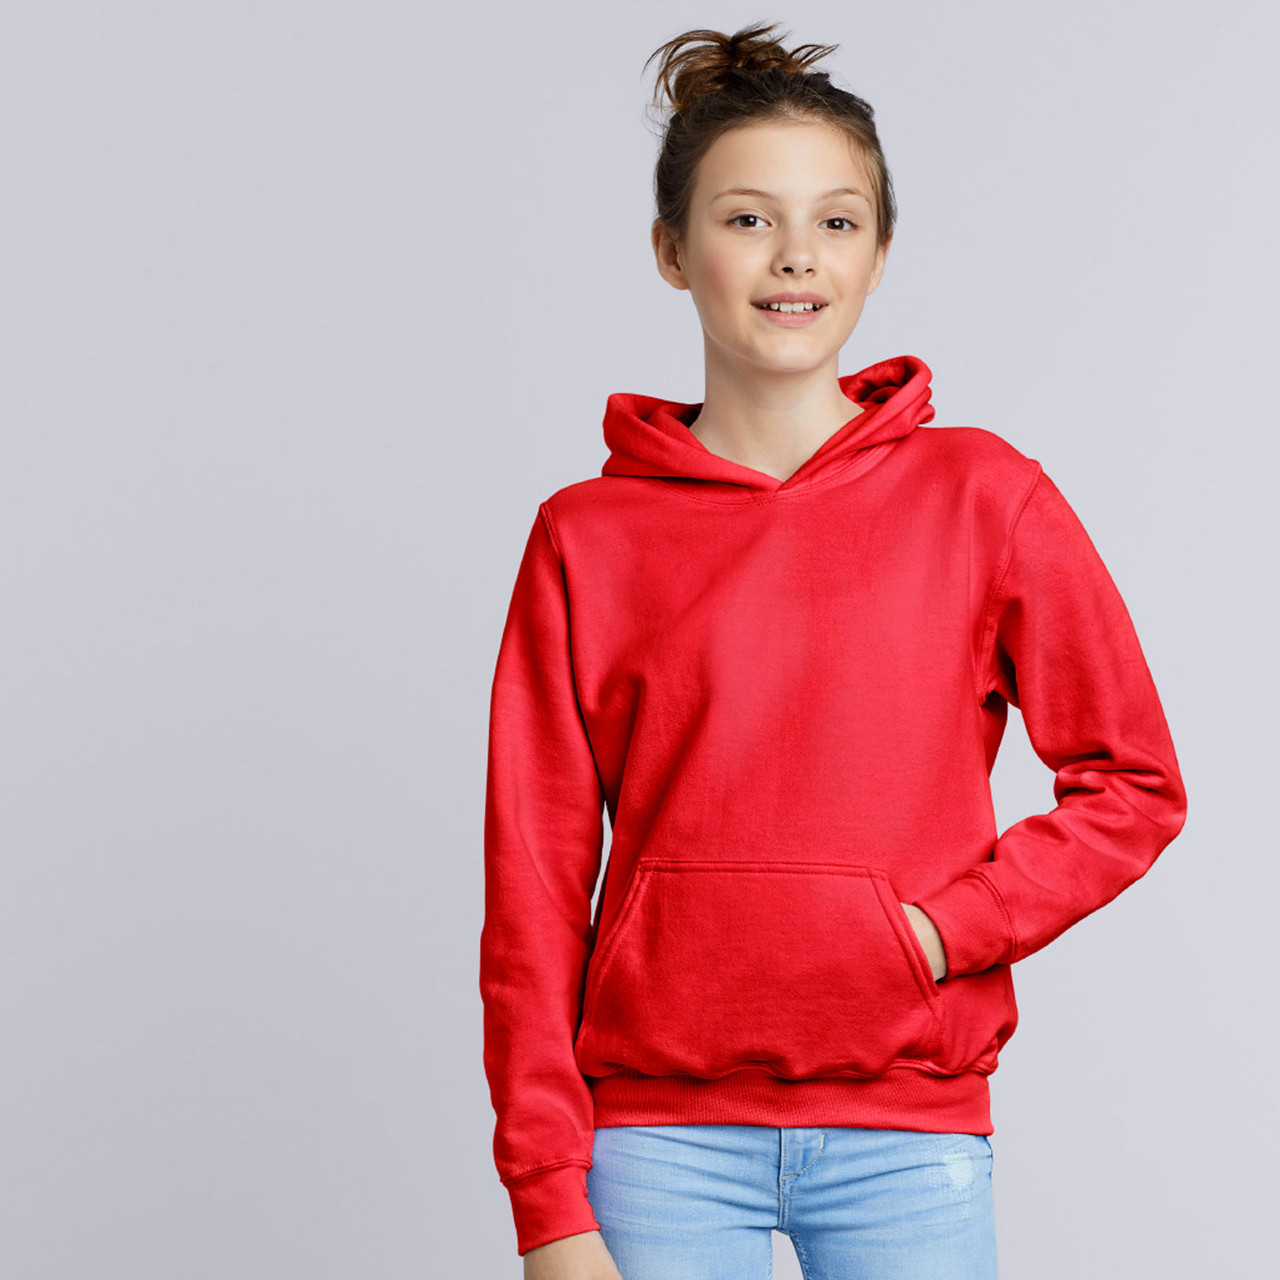 Top 104+ Wallpaper Why Are Kids Wearing Hoodies In The Summer Superb 10 ...